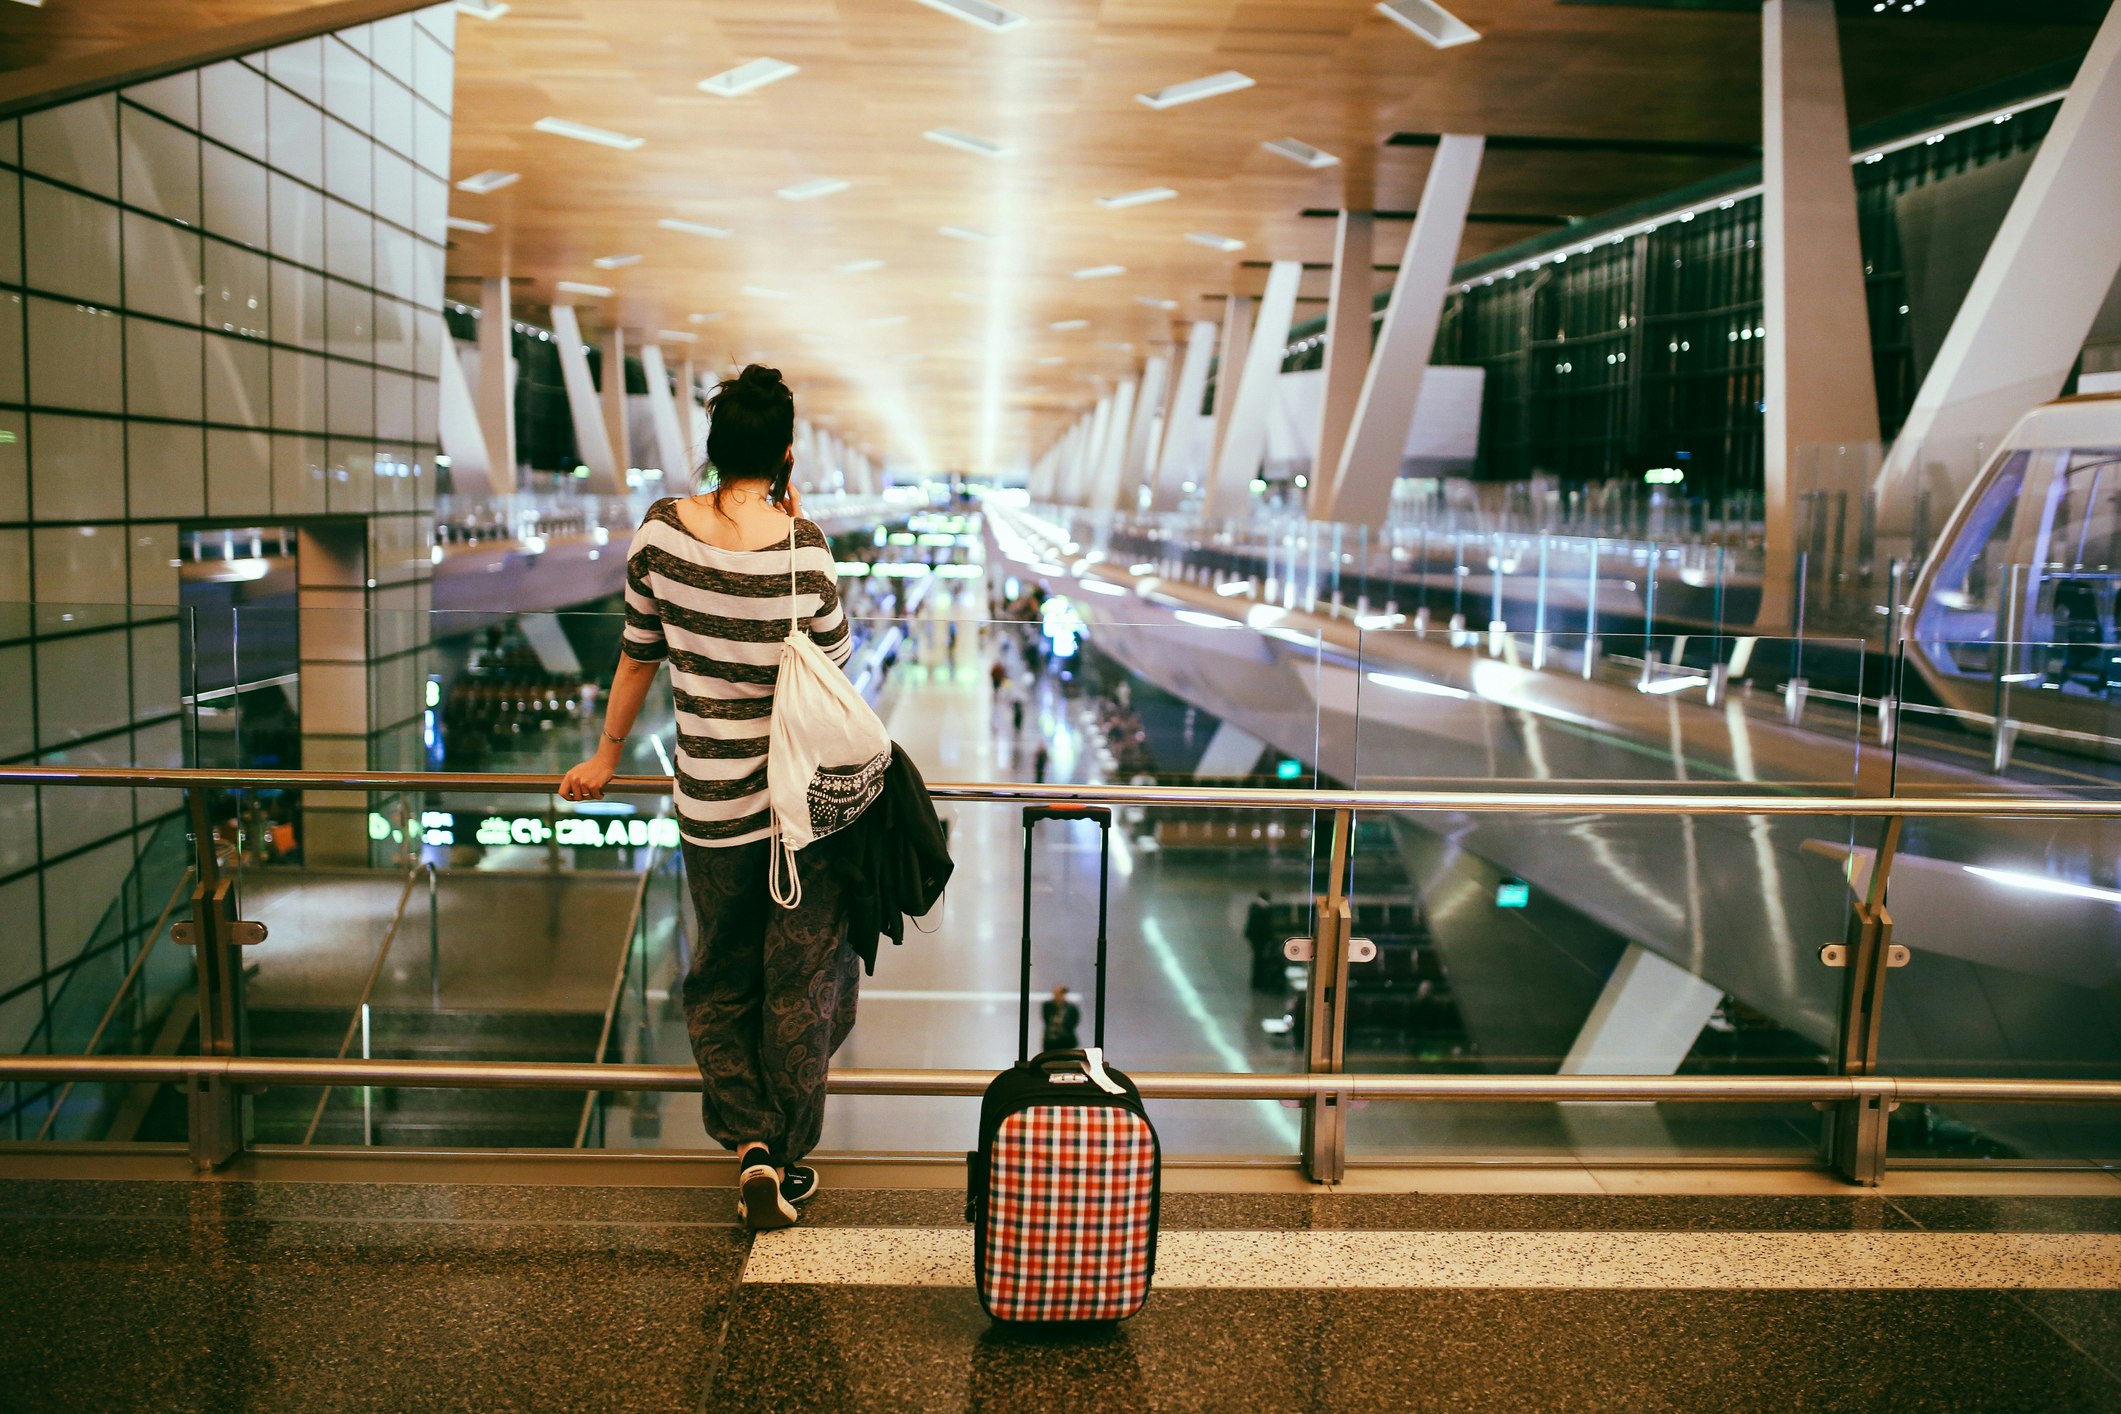 A young woman in baggy grey pants, a grey and white striped shirt, a white athletic-style backpack, and a brightly colored plaid carry-on roller bag stands on the upper level of the Doha airport overlooking the terminal below as she holds a phone to her ear 